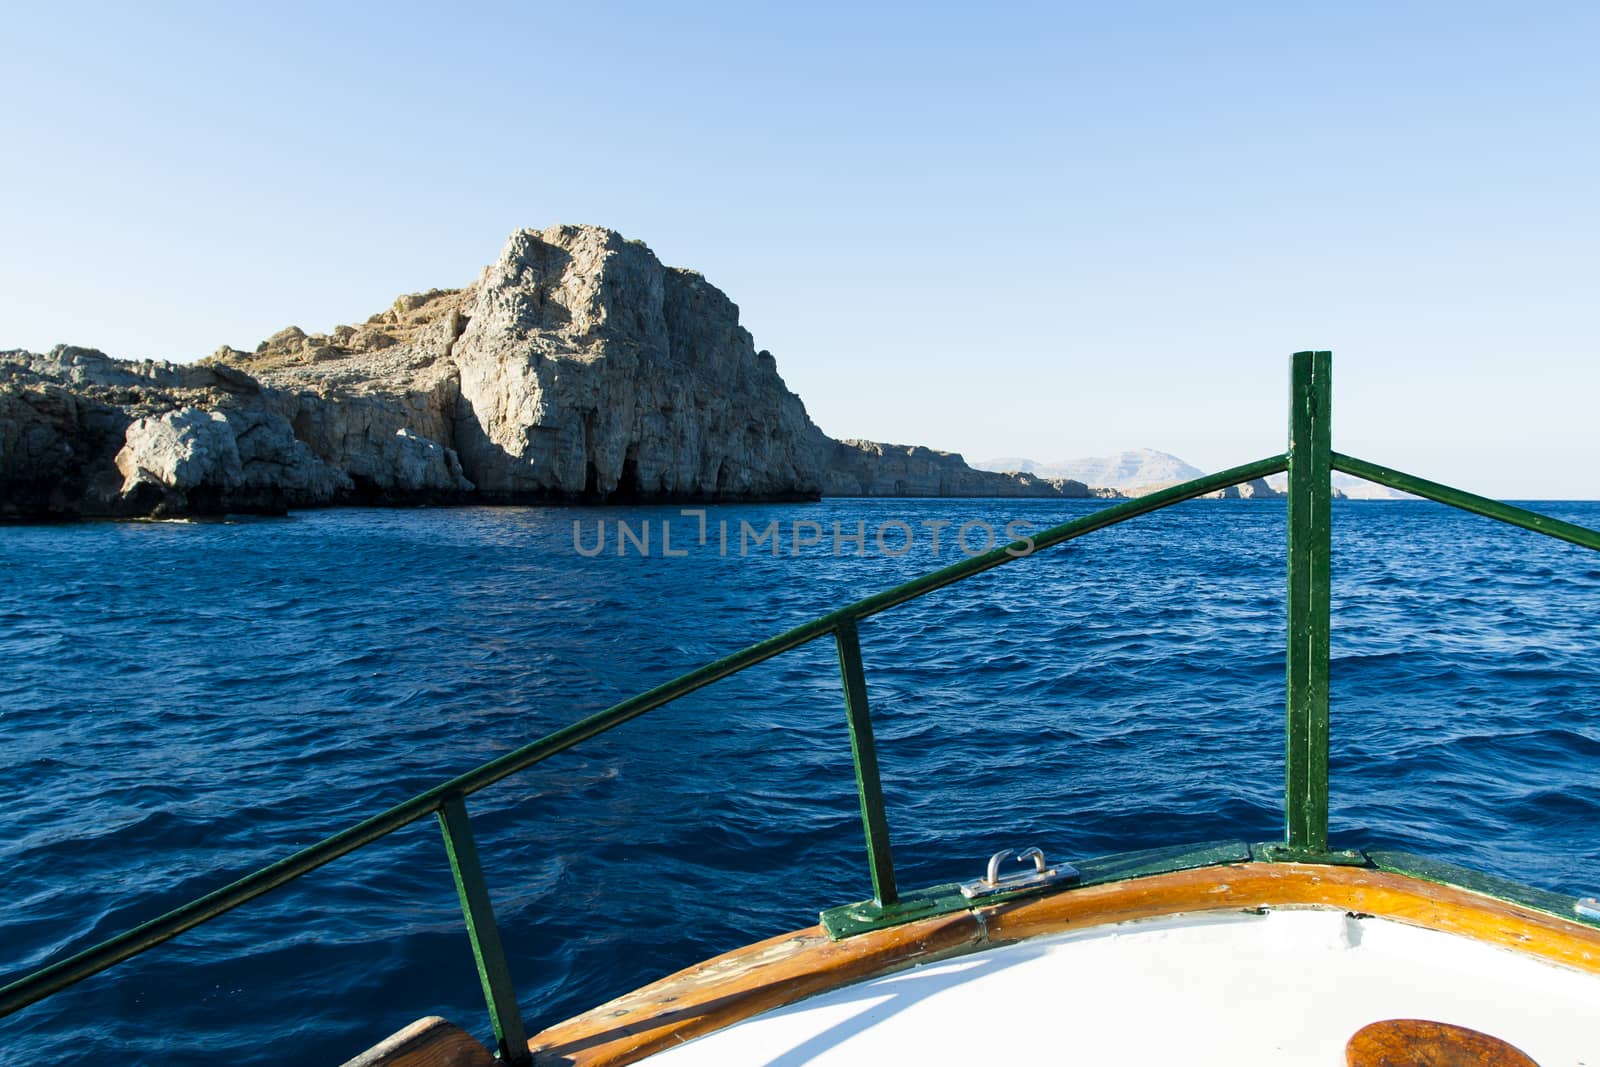 View of the coast of the island of Rhodes by the bow of a boat